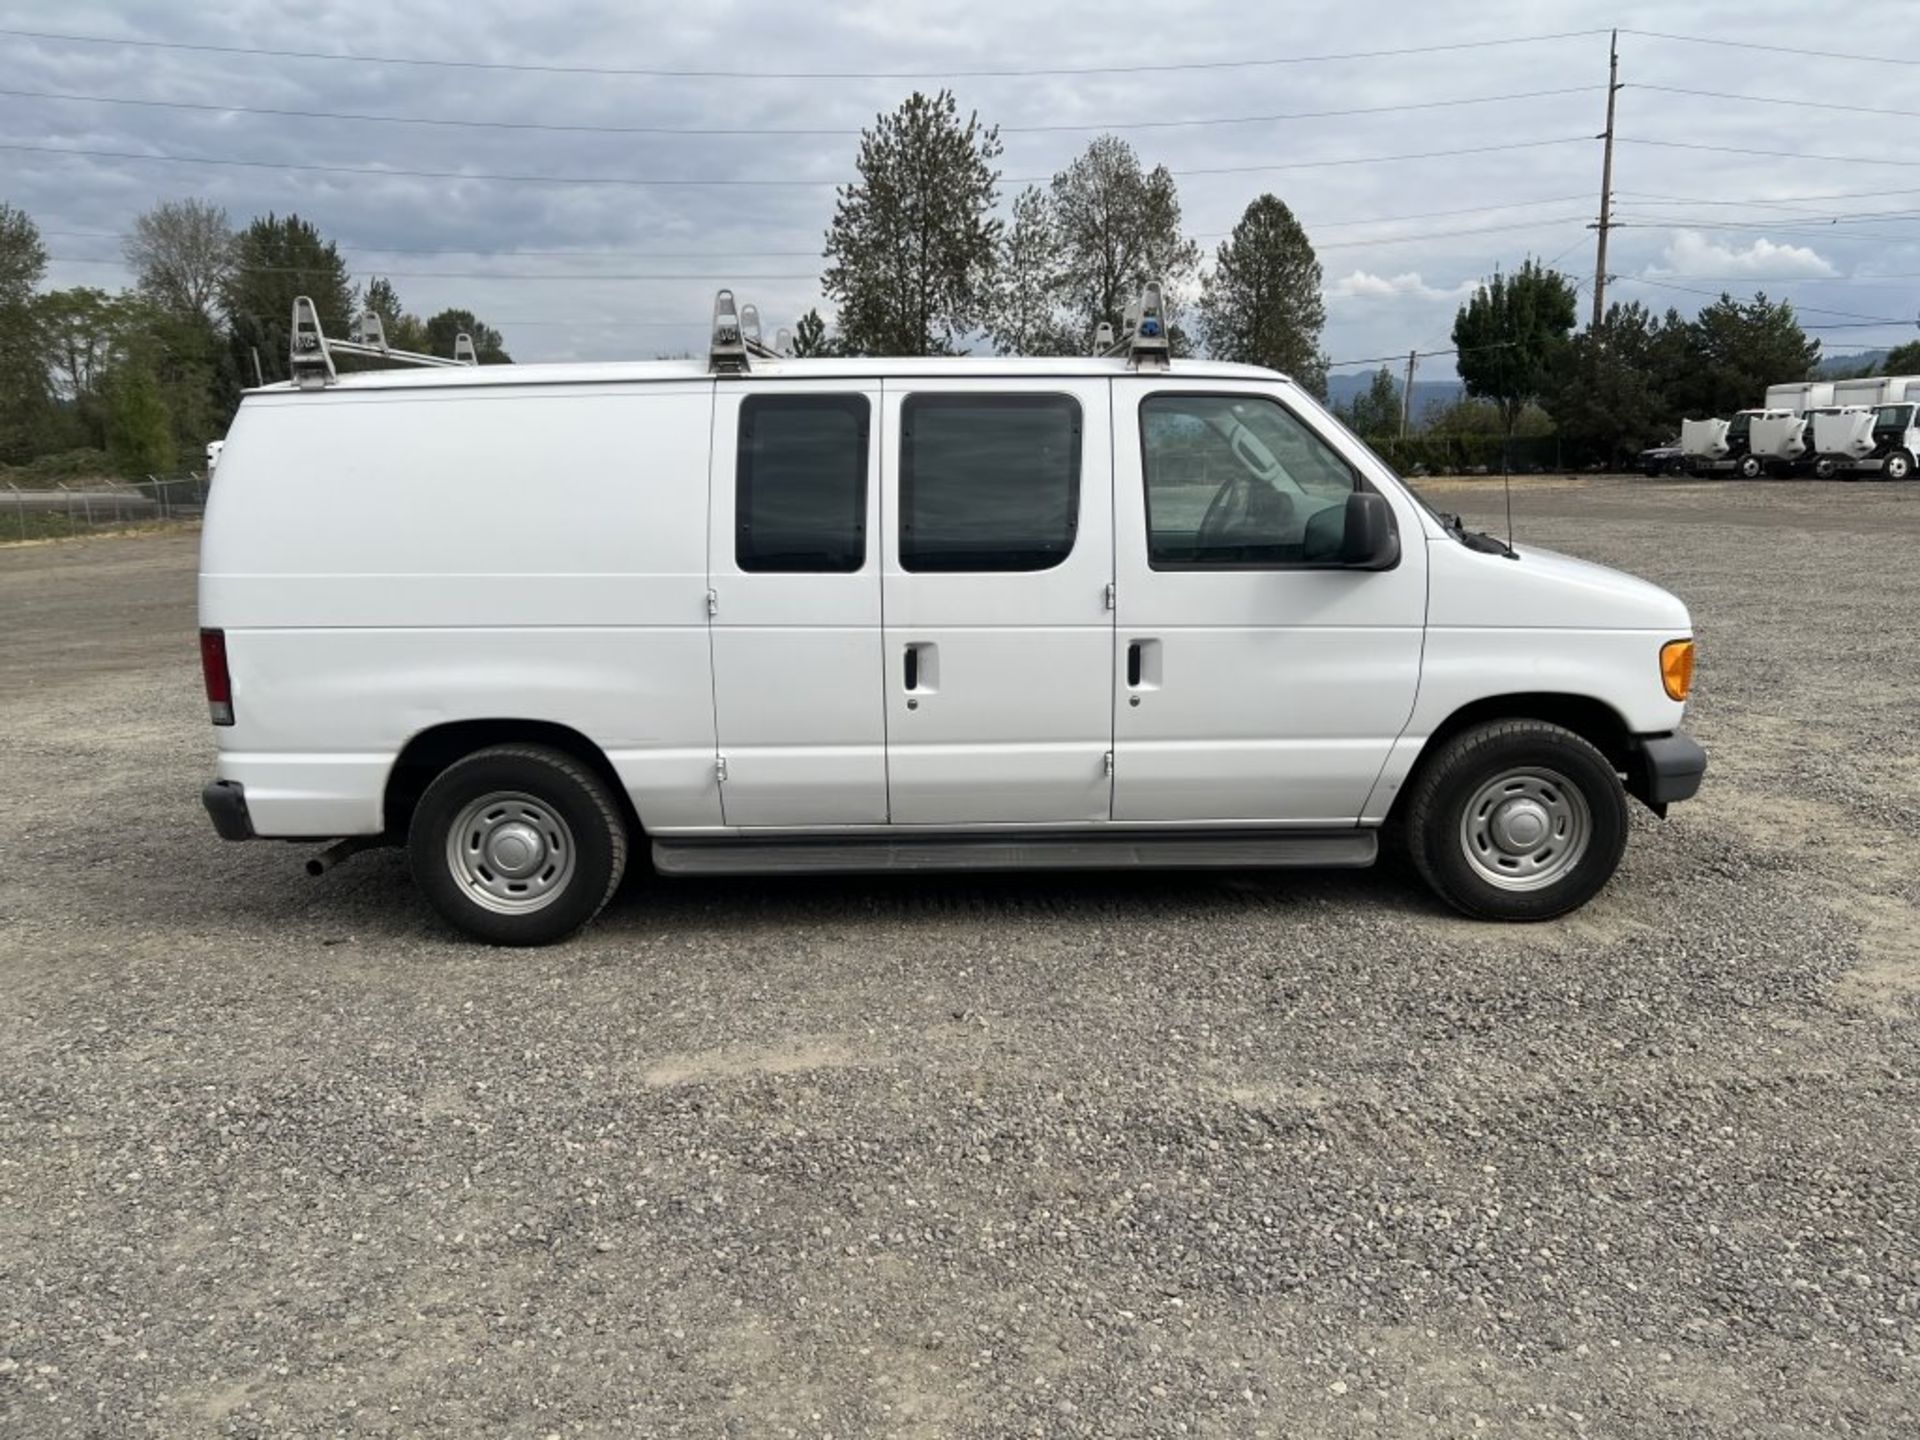 2006 Ford E150 Cargo Van - Image 3 of 21